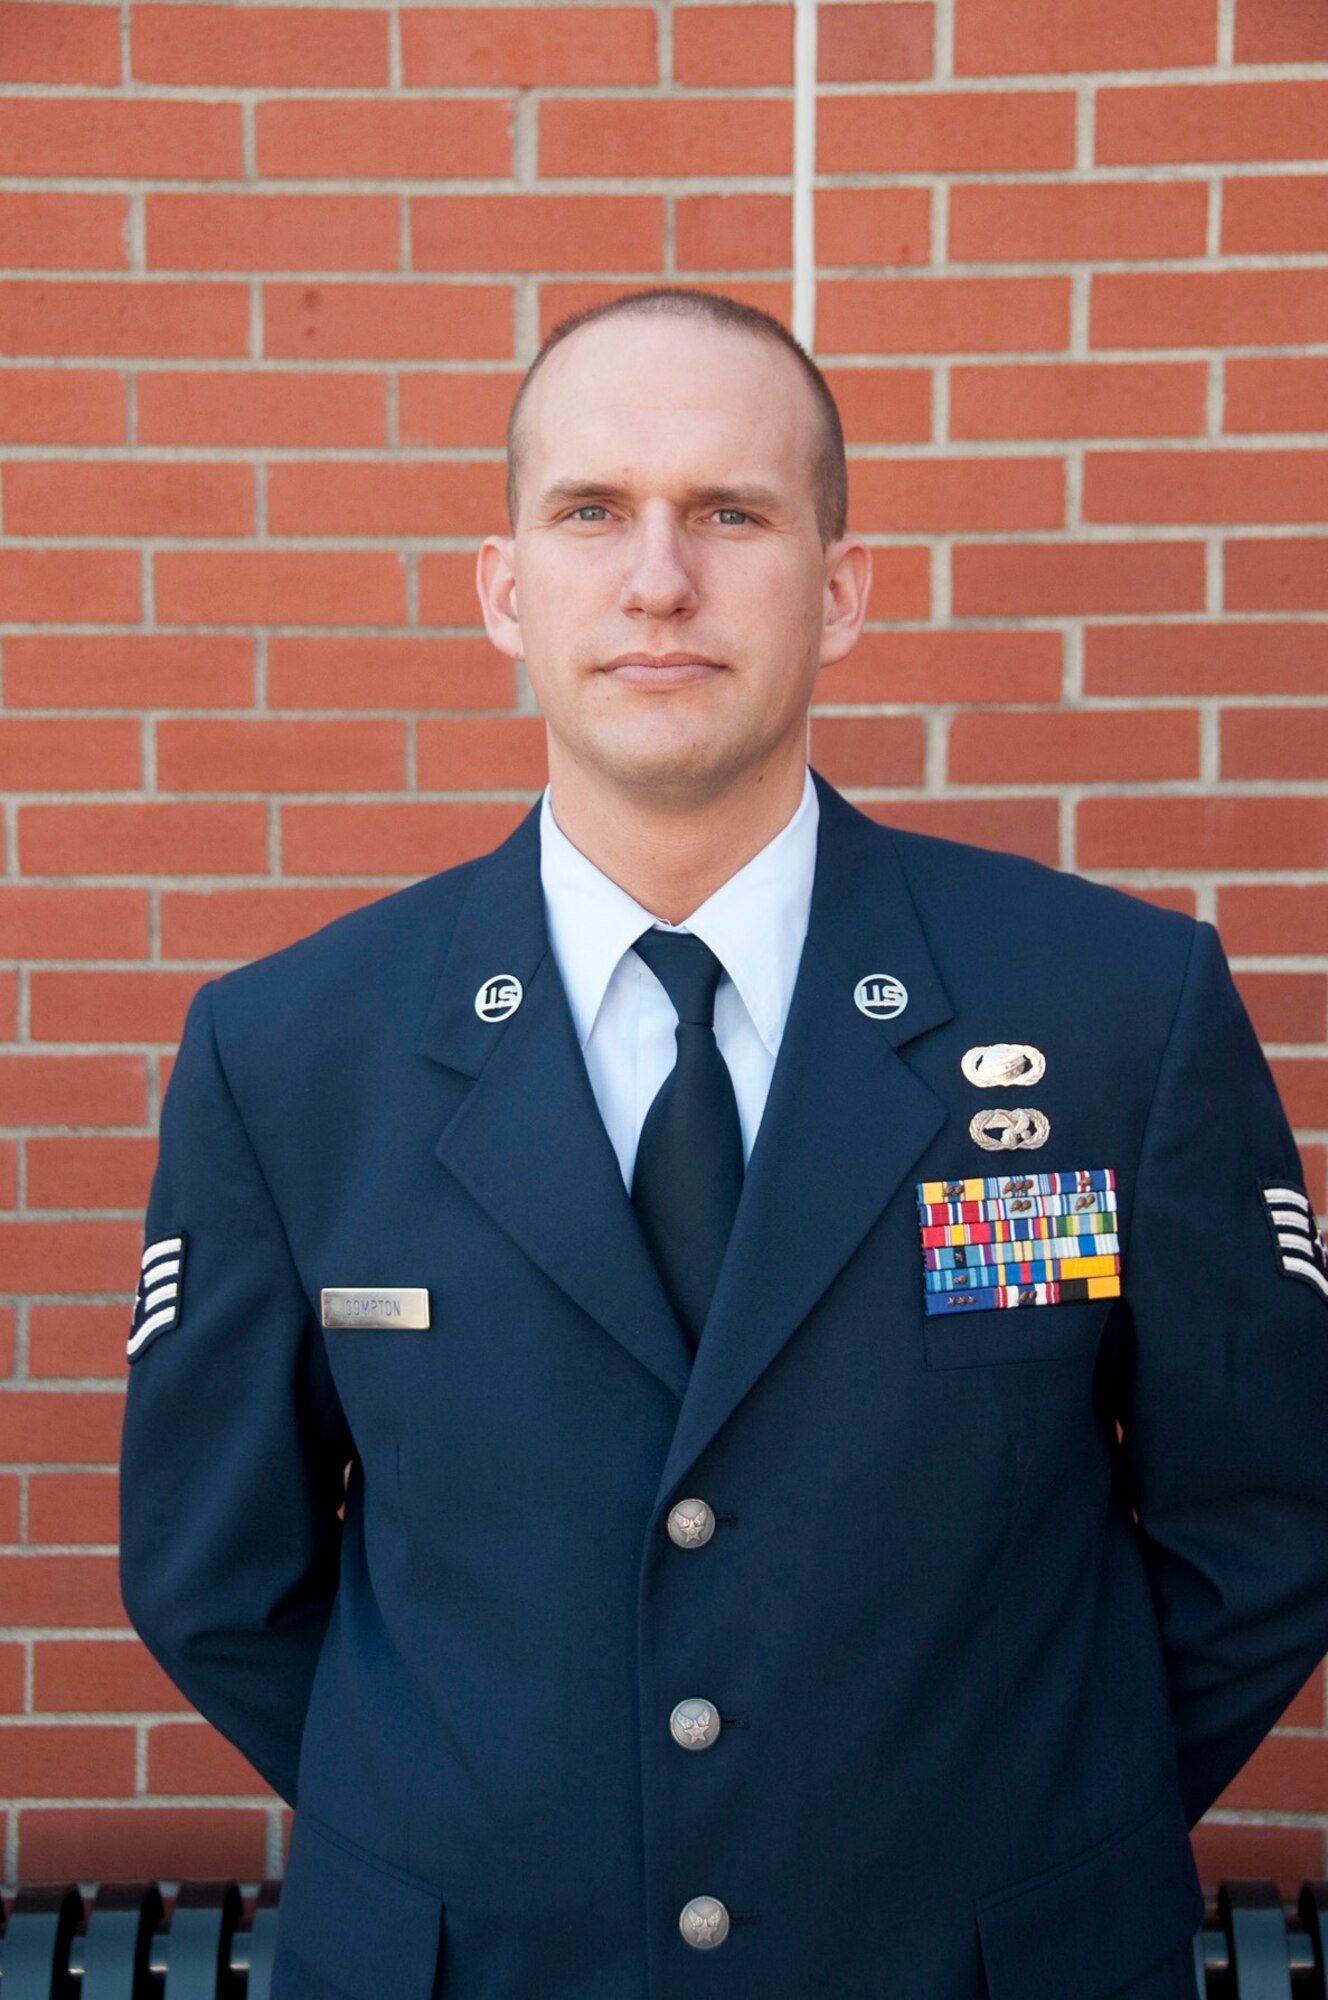 Staff Sgt. Charles Compton, is awarded NCO of the year at the 139th Airlift Wing.
